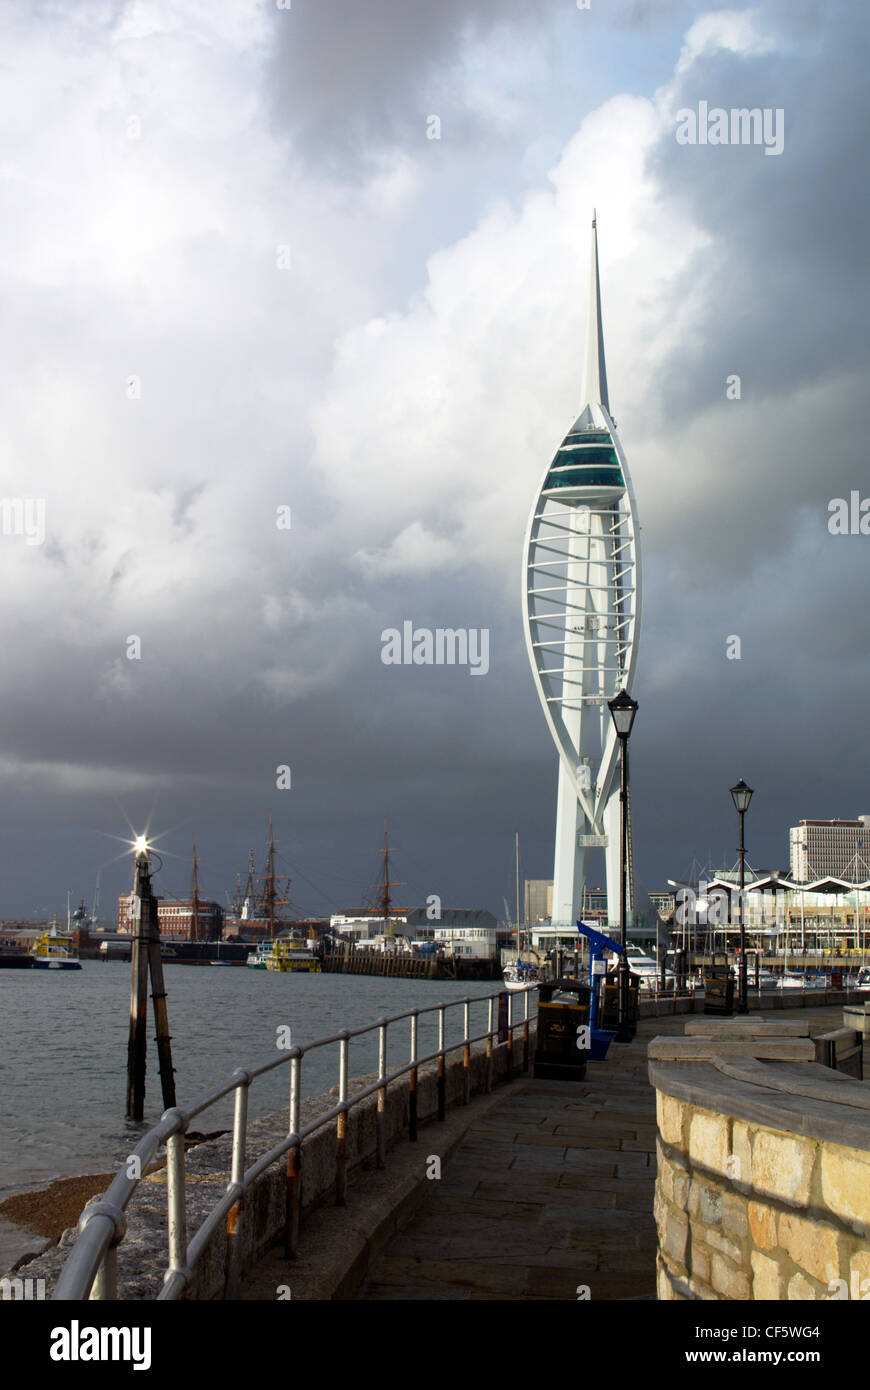 Spinnaker Tower. The tower, at a height of 170 metres (558 feet) above sea level, is 2.5 times higher than Nelson's Column, maki Stock Photo